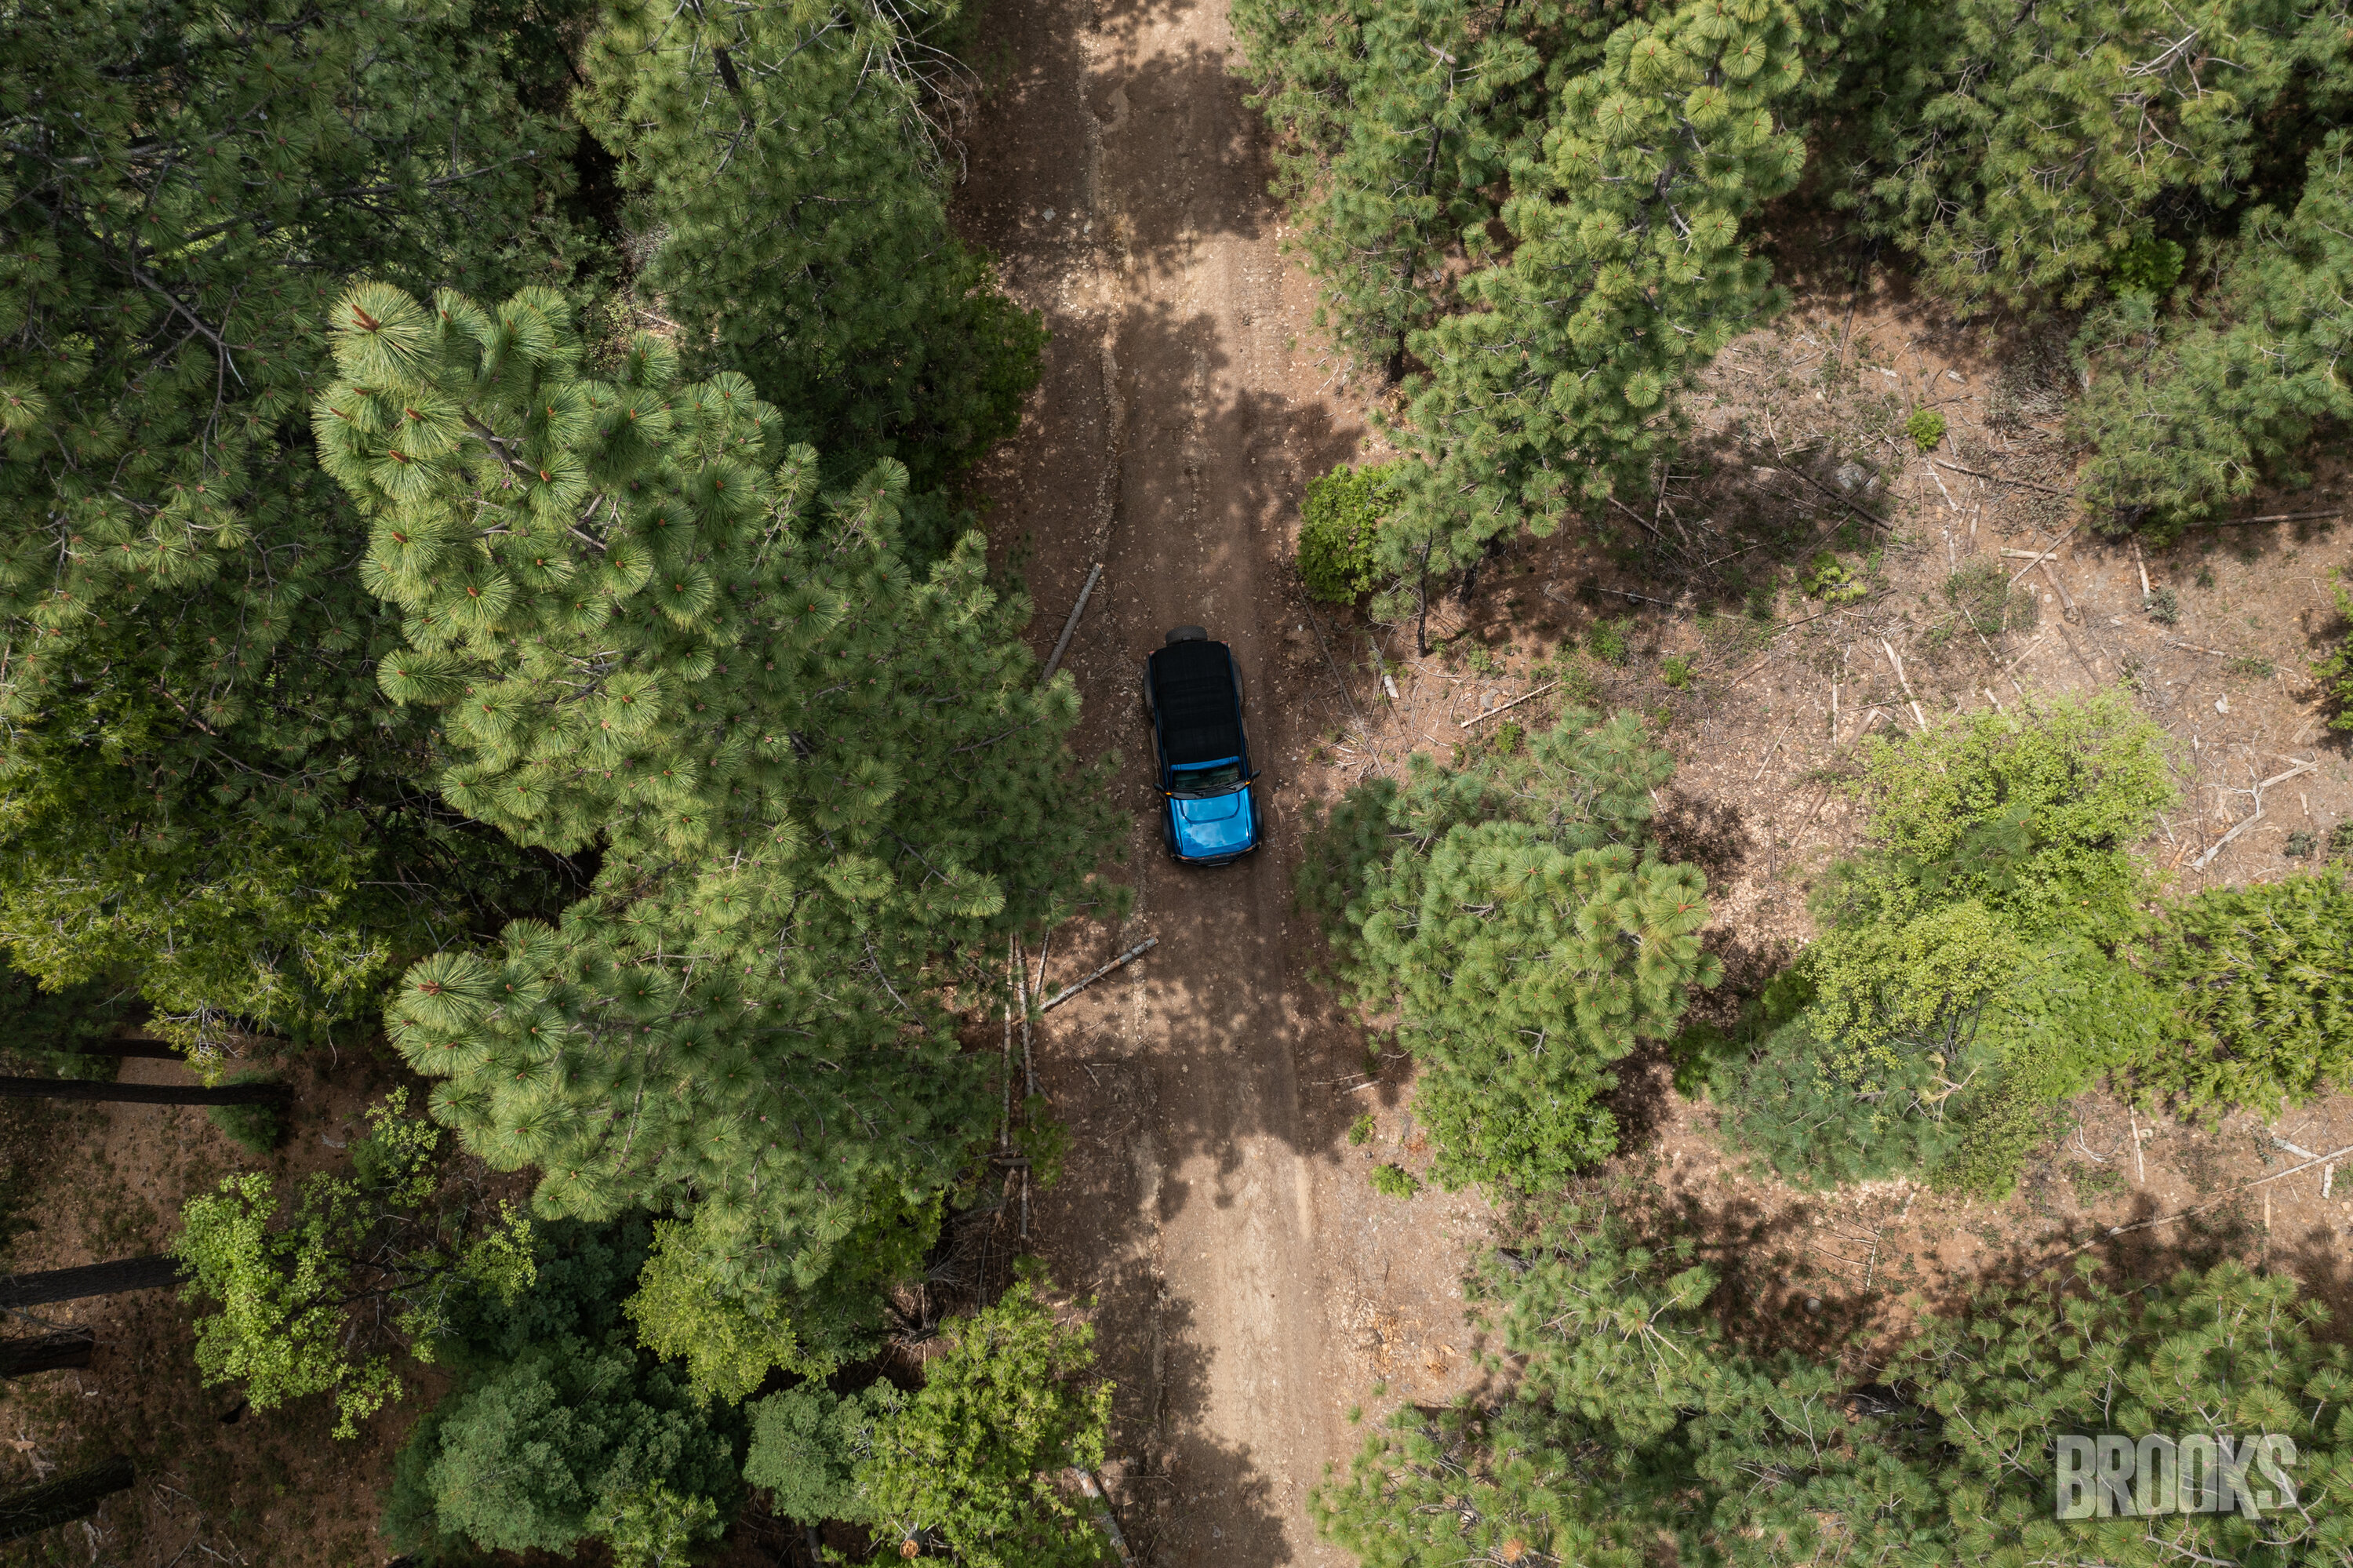 Ford Bronco Solo trip up to the hills this weekend DJI_0611